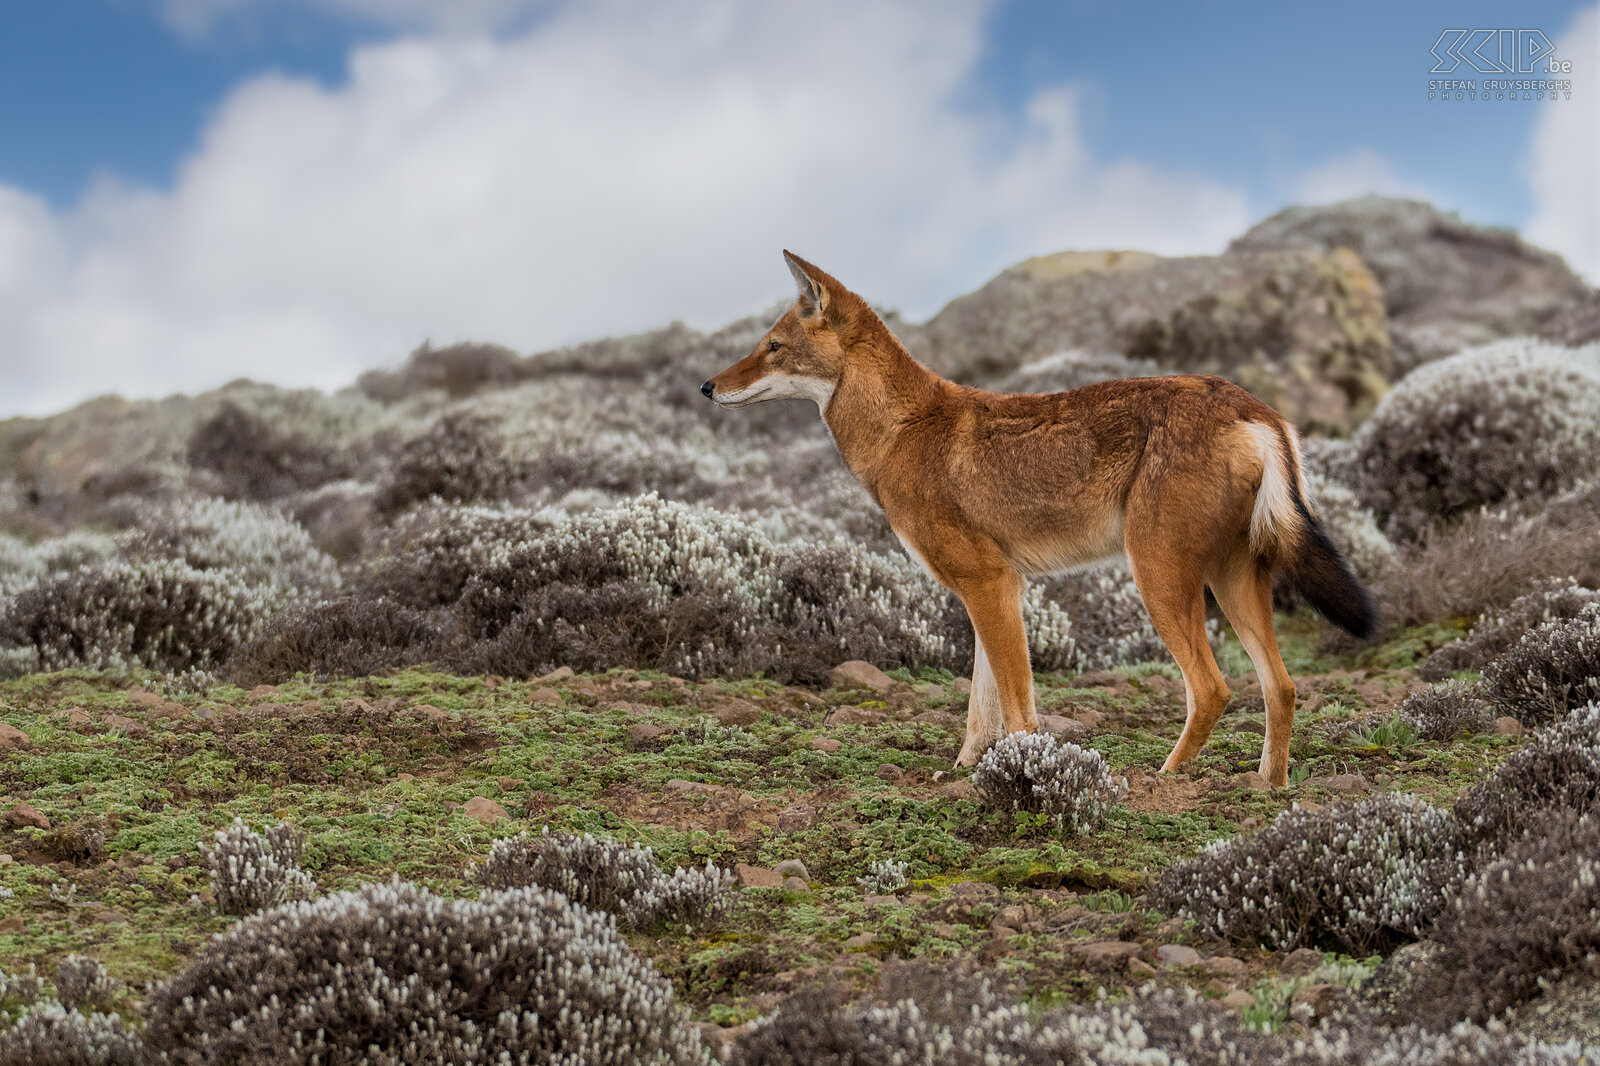 Bale Mountains - Sanetti - Ethiopian wolf The Ethiopian wolf (Canis simensis) is the world's rarest canid and Africa's most endangered carnivore. There are several organizations that try to protect this unique animal. More than half of the population lives on the Sanetti Plateau in the Bale Mountains. Stefan Cruysberghs